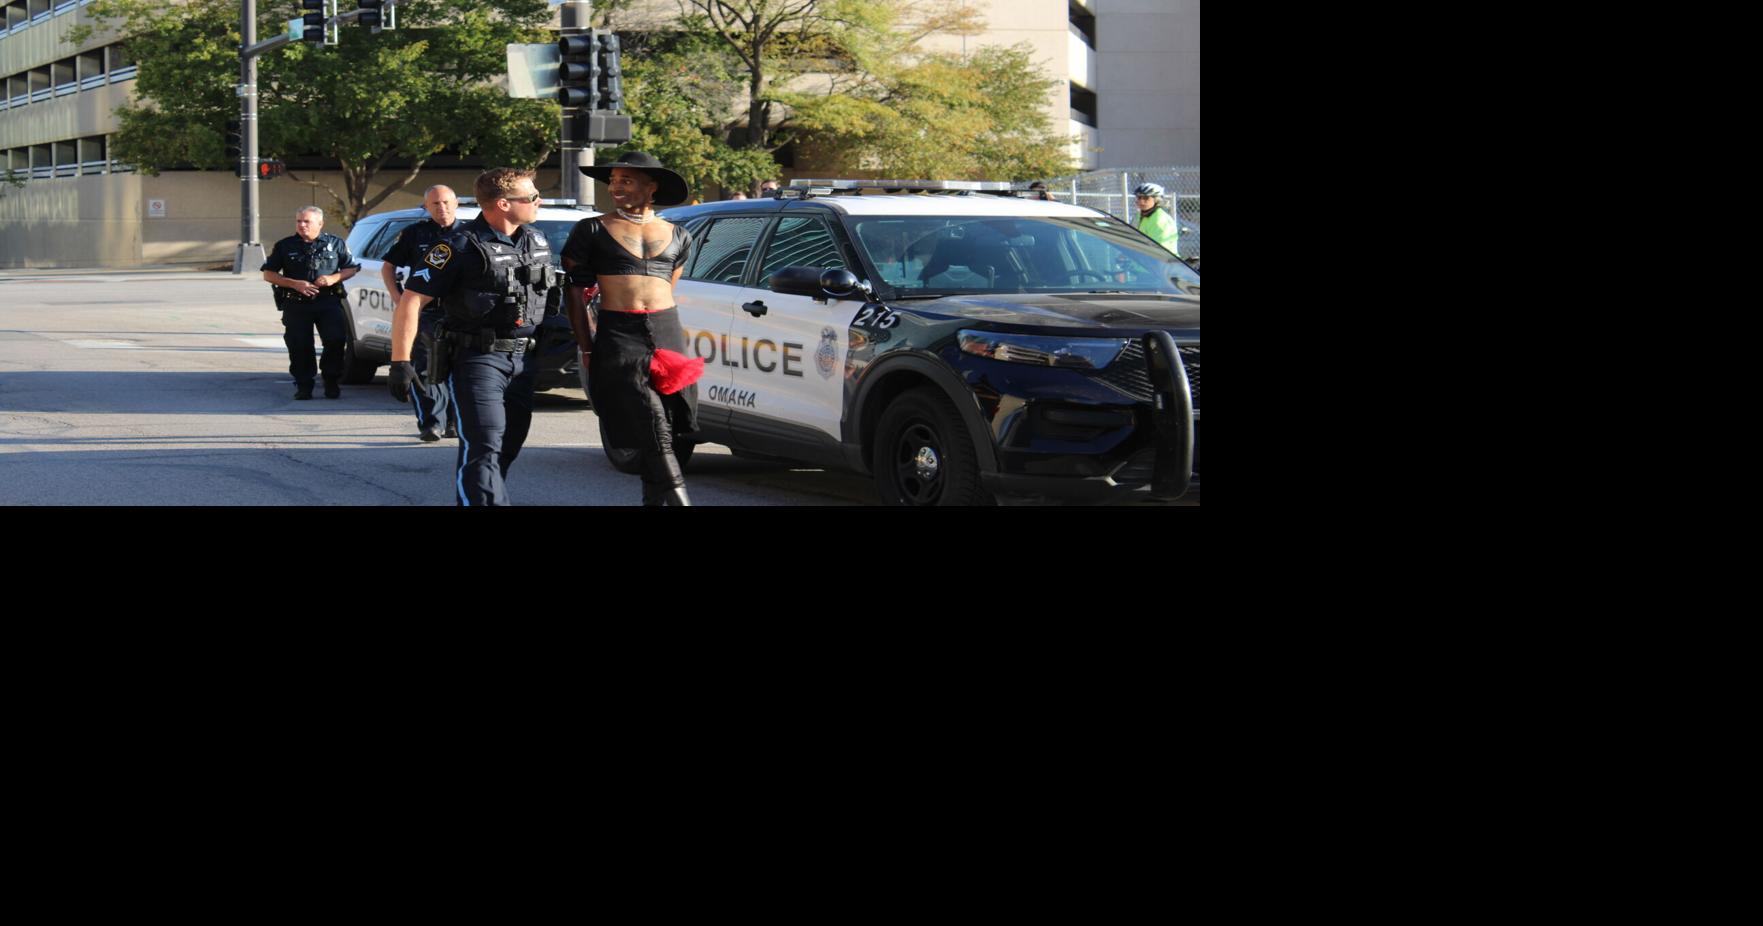 Two arrested while protesting demolition of downtown Omaha library